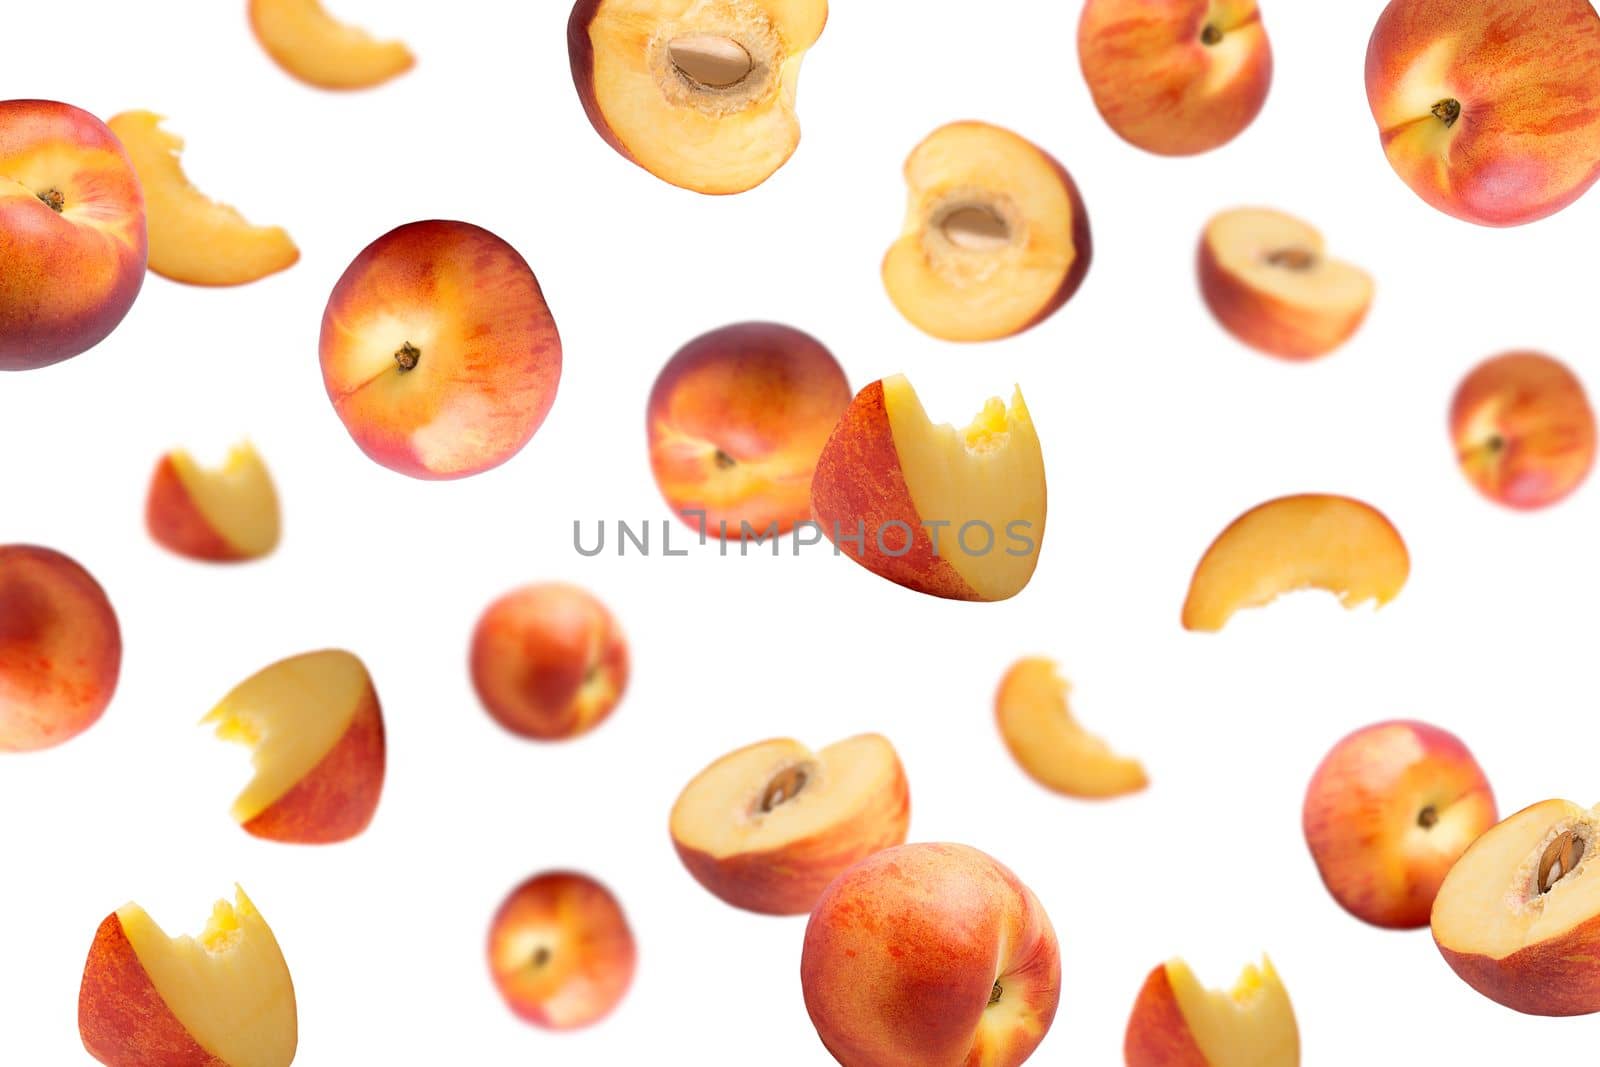 Falling peaches on white surface for advertisement by Ciorba